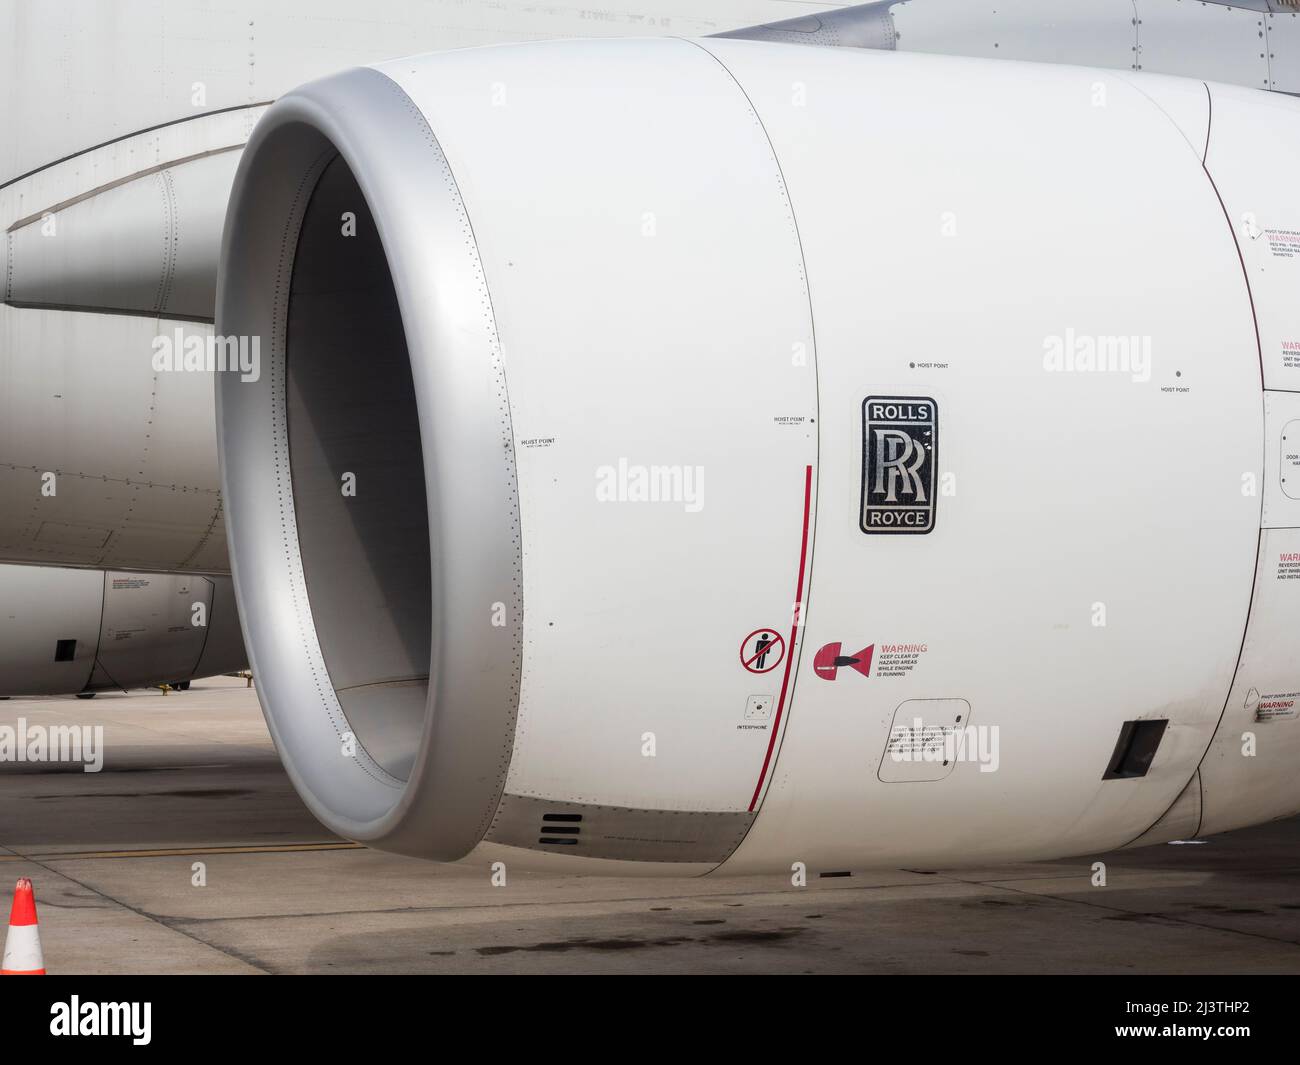 Close-up of a Rolls Royce jet engine of an Airbus passenger aircraft Stock Photo